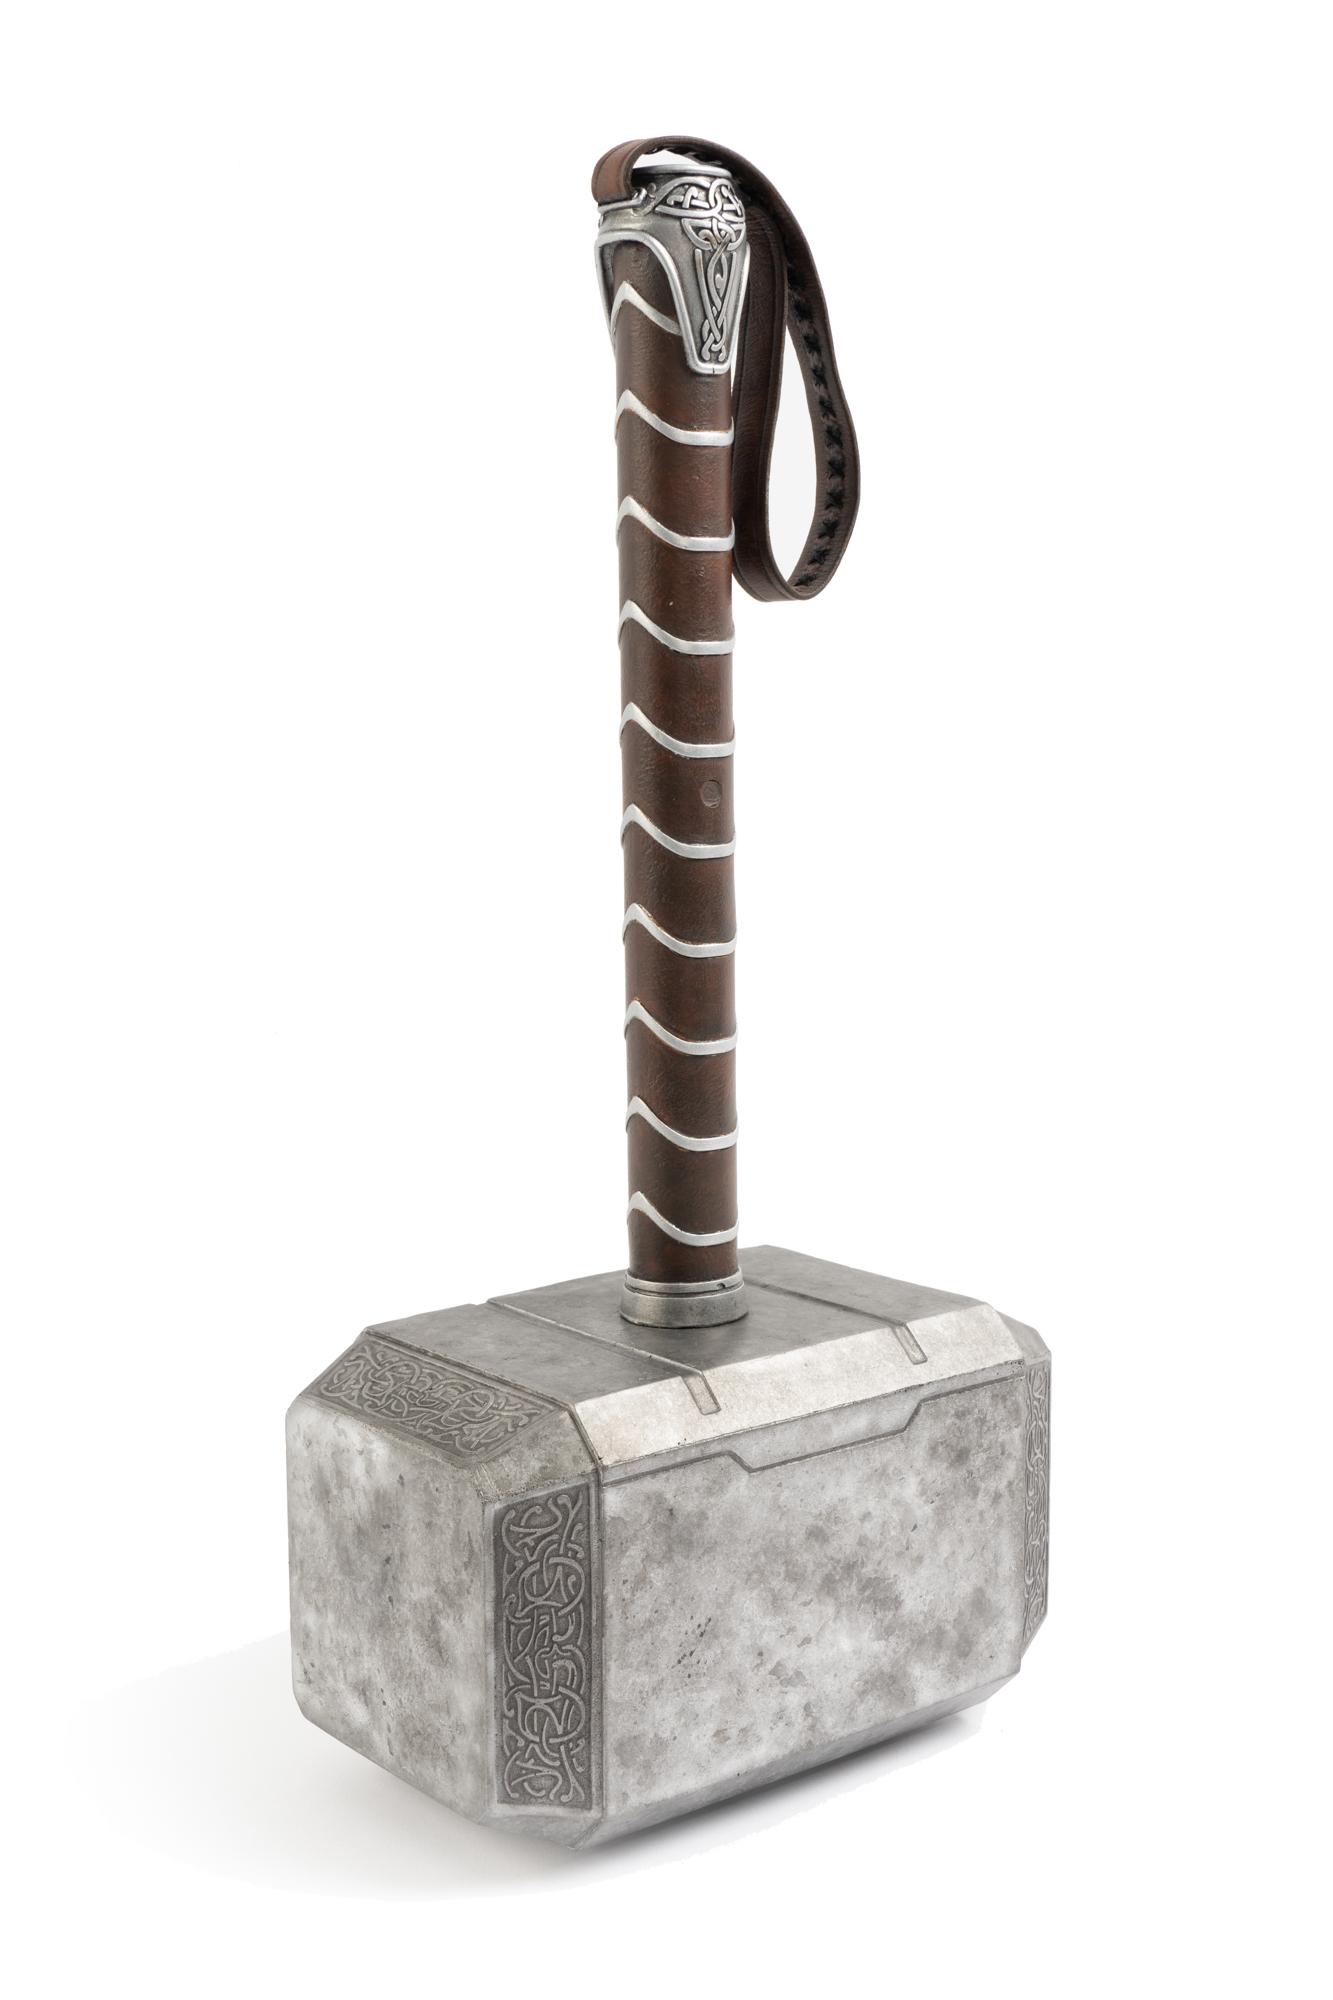 Chris Hemsworth's 'Thor' Hammer Going Up For Sale in Movie Memorabilia  Auction